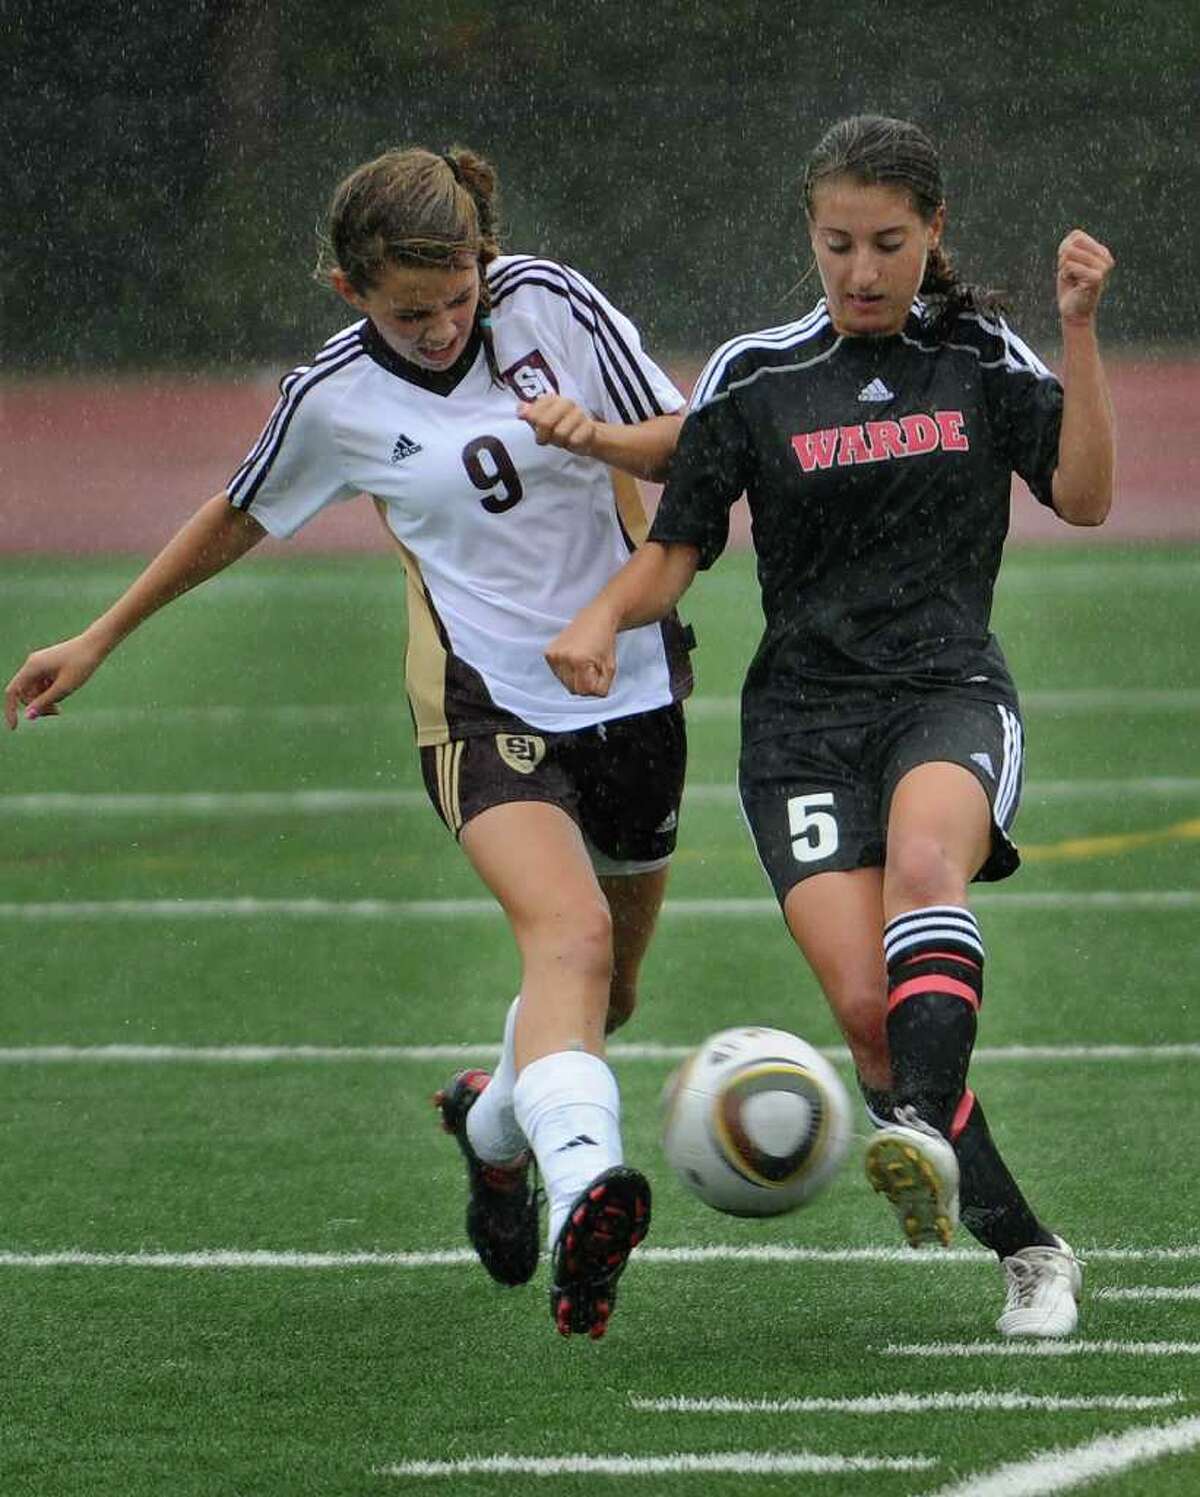 St. Joseph's Sabrina Toole and Fairfield Warde's Carly Mappa converge on the ball during their 1-1 tie at St. Joseph High School in Trumbull on Monday, September 27, 2010.